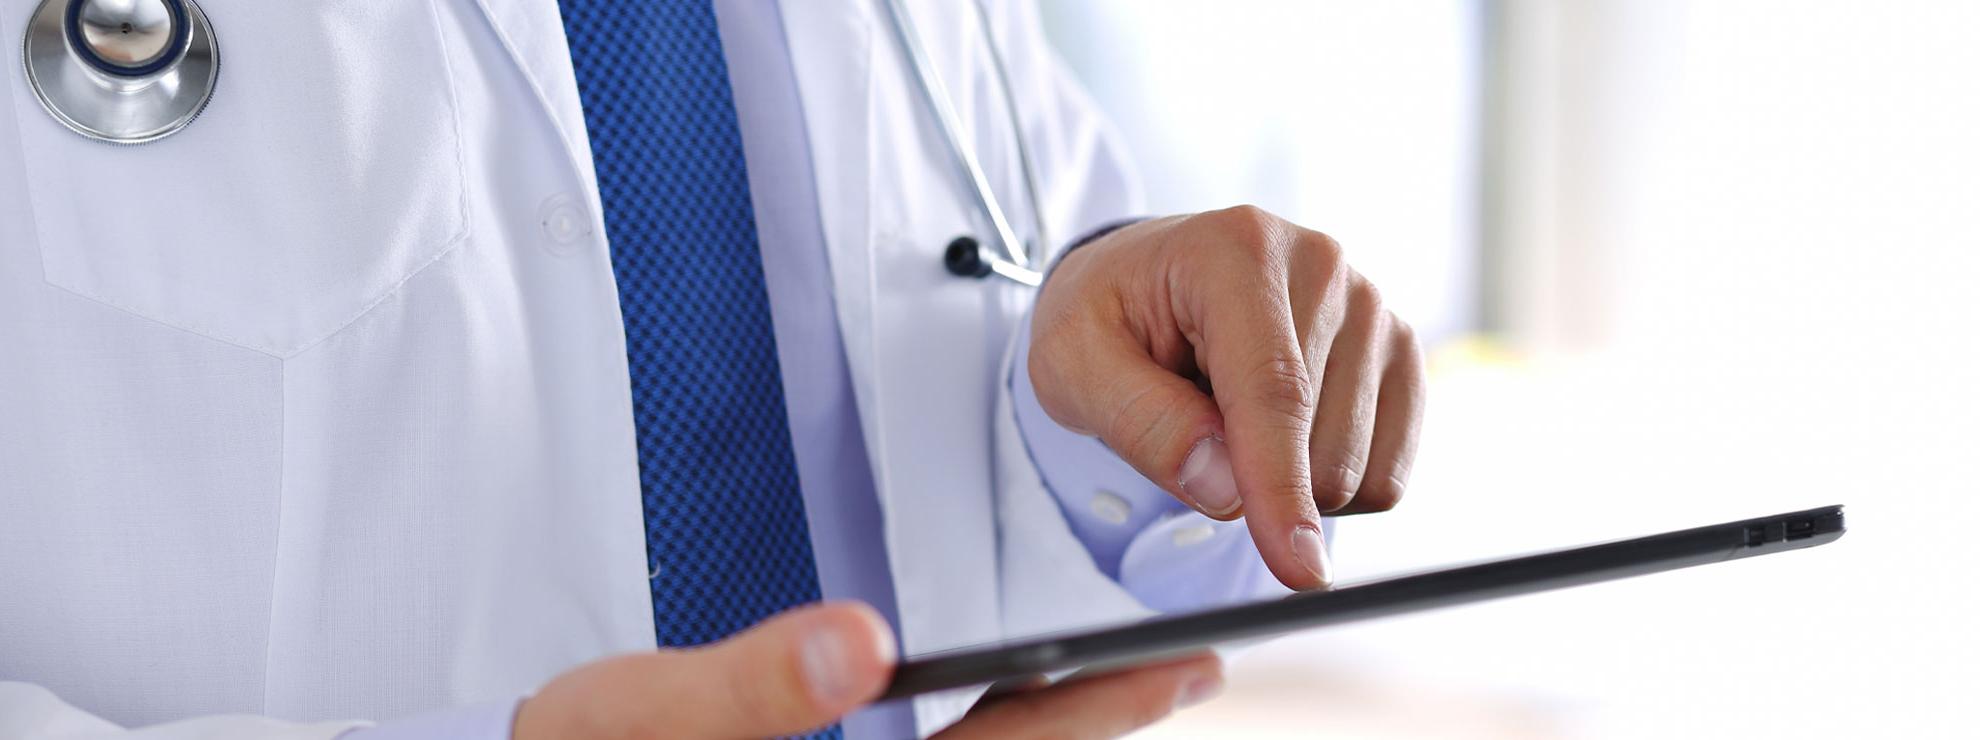 Digitize and Manage Healthcare Documents